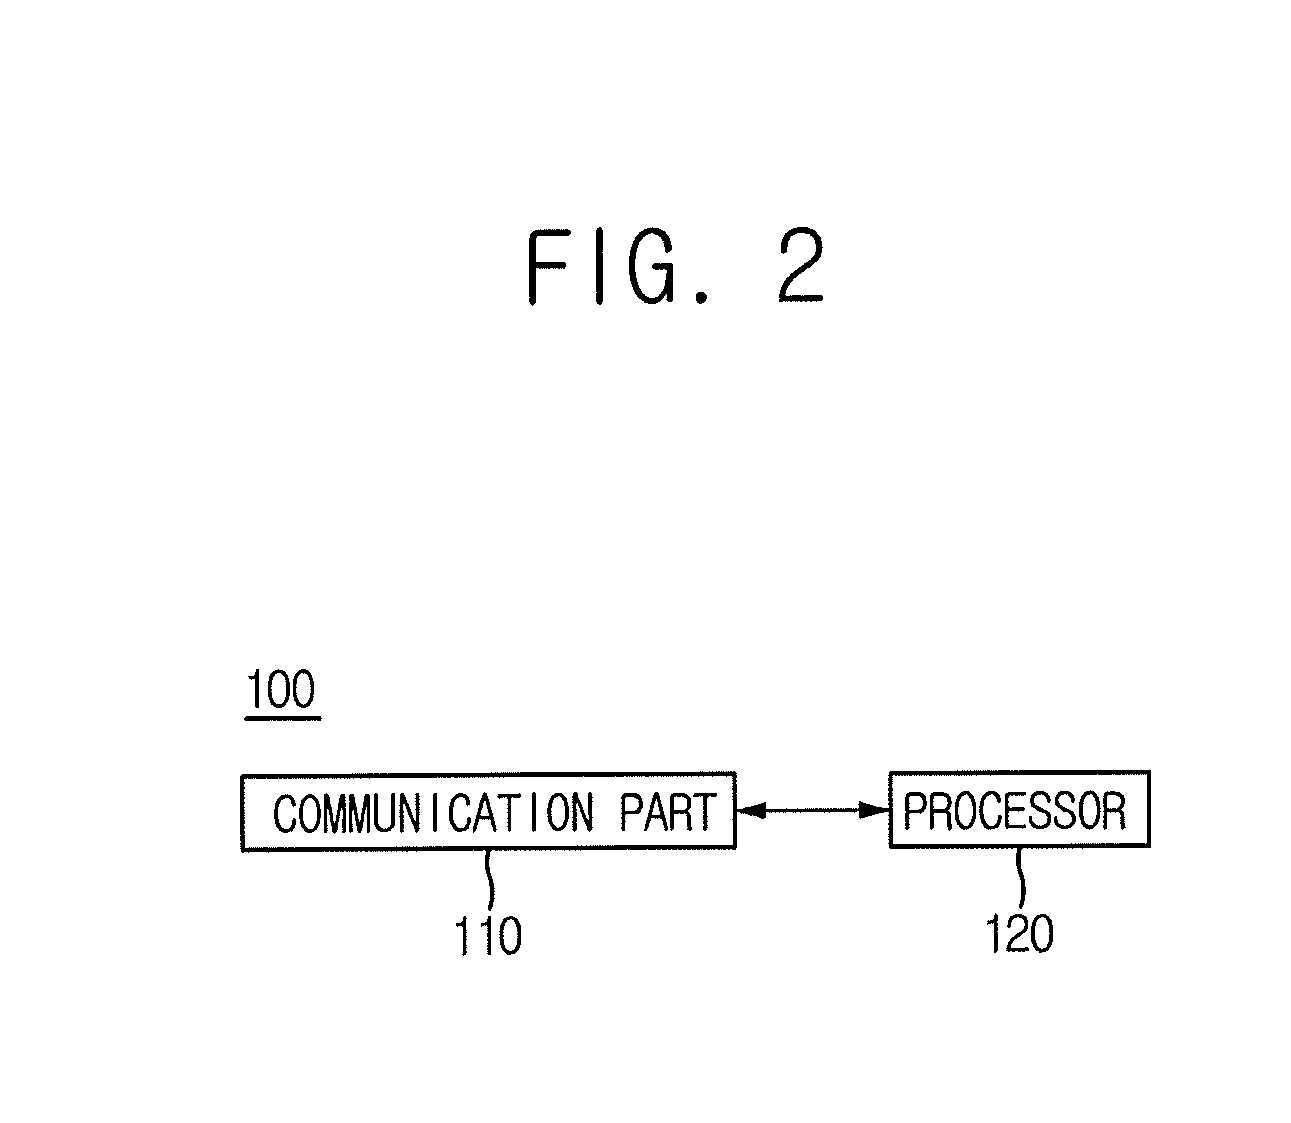 Method for learning rejector by forming classification tree in use of training images and detecting object in test images, and rejector using the same